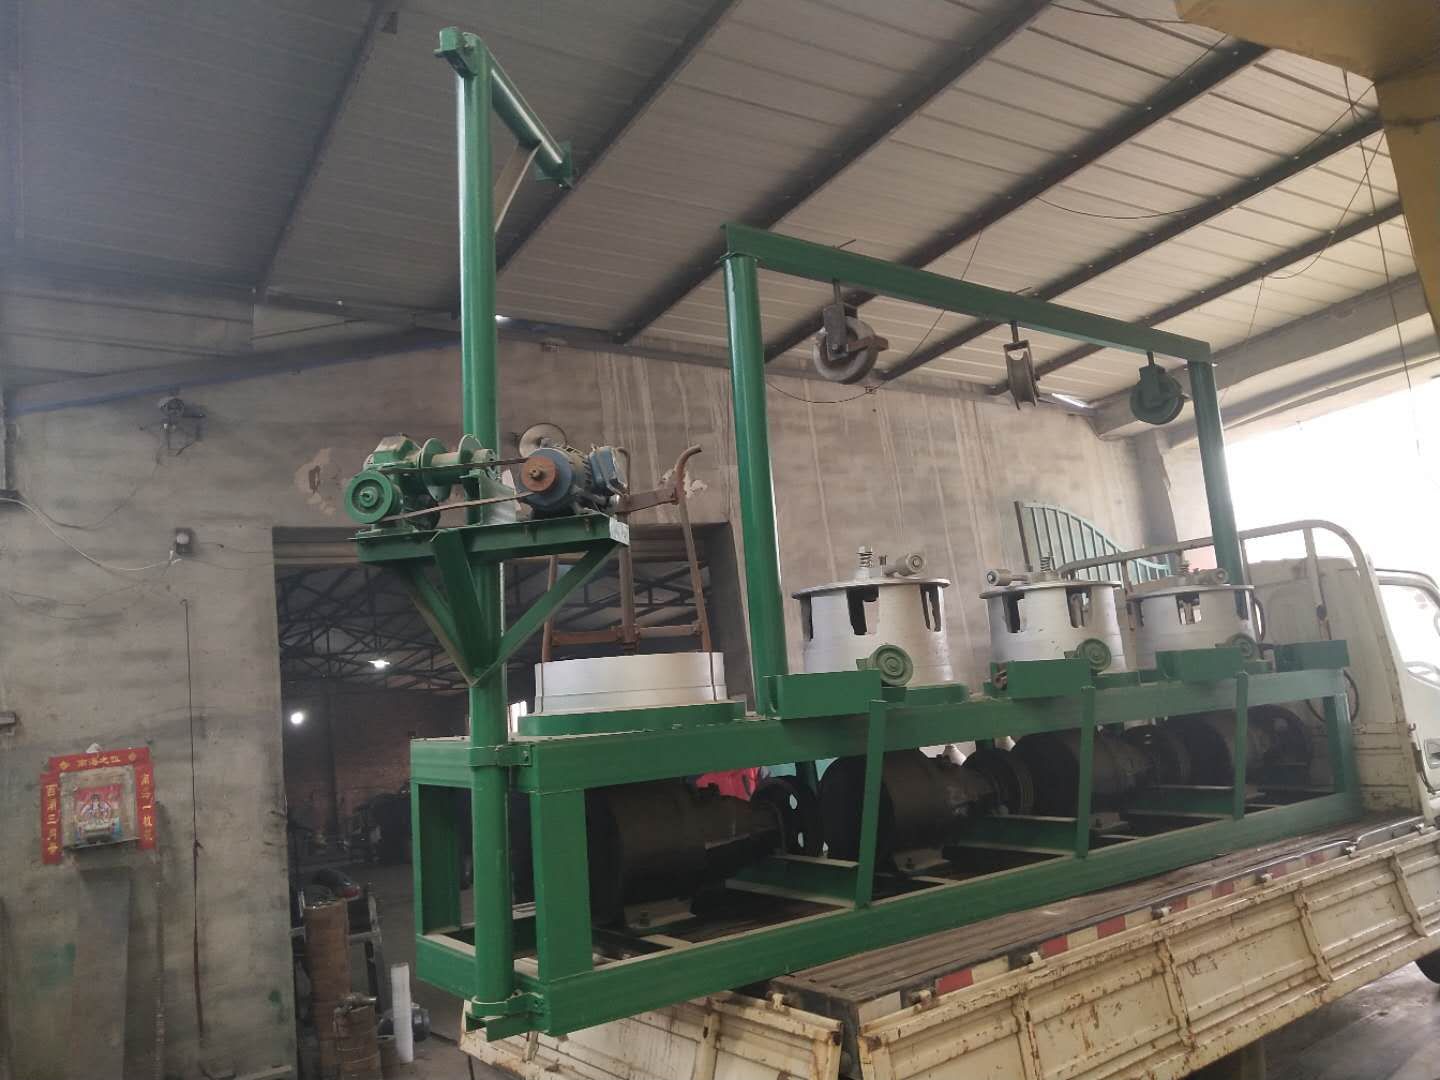 Cheap pulley type wire drawing machine factory